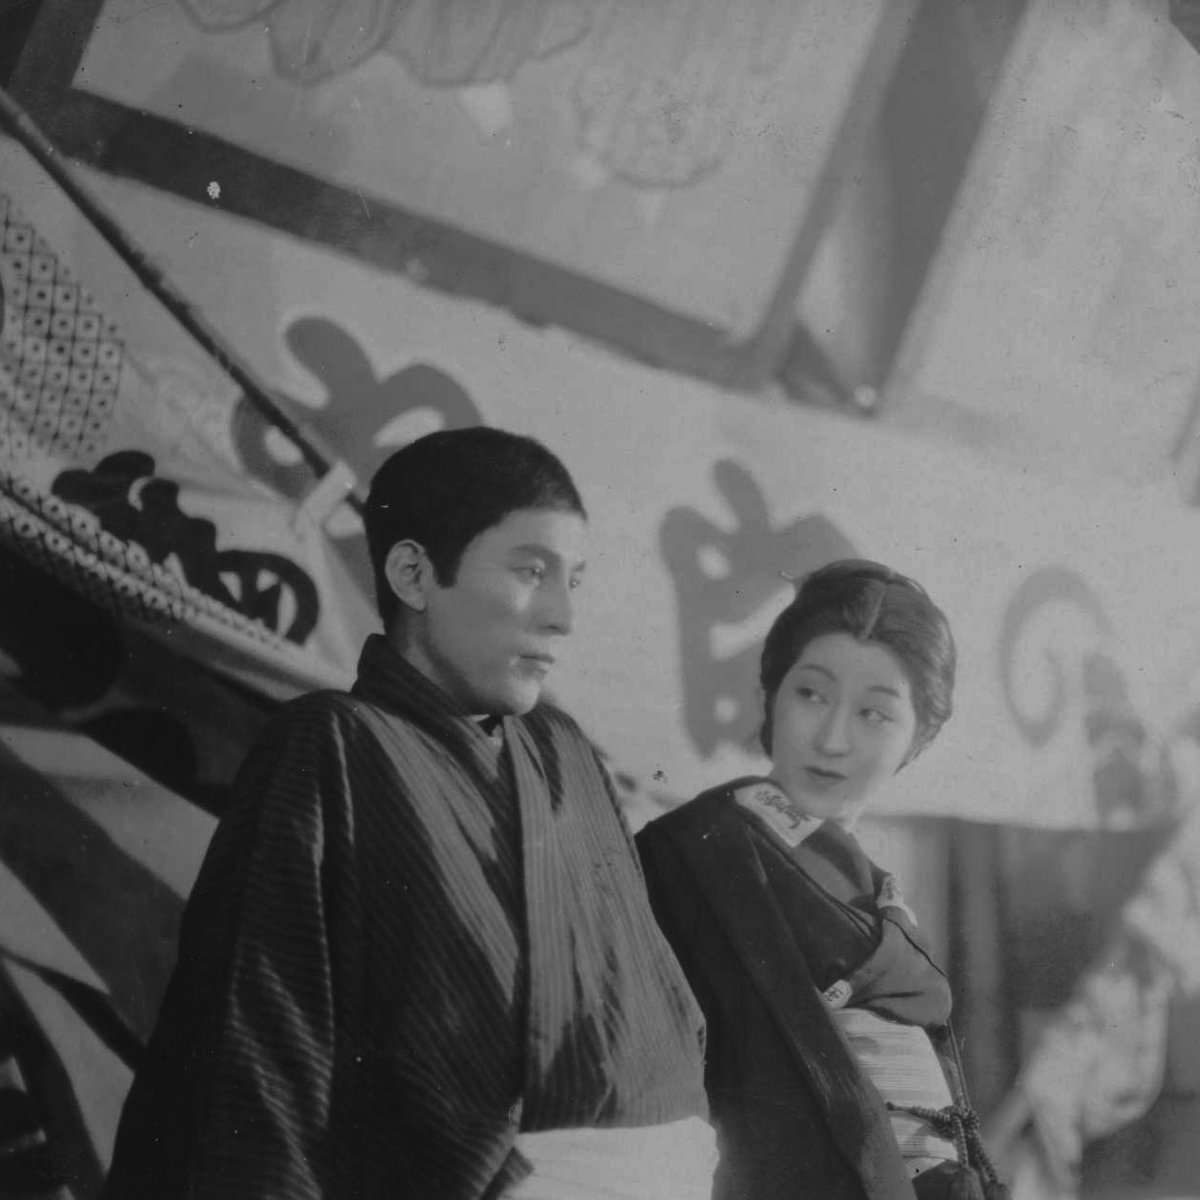 The elements of director Kenji Mizoguchi’s mature style are evident in “The Water Magician” (1933), which screens for free this Saturday as part of “The Art of the Benshi.” All films presented with live Japanese benshi narration & music, this weekend only! ucla.in/3Jb4ShD